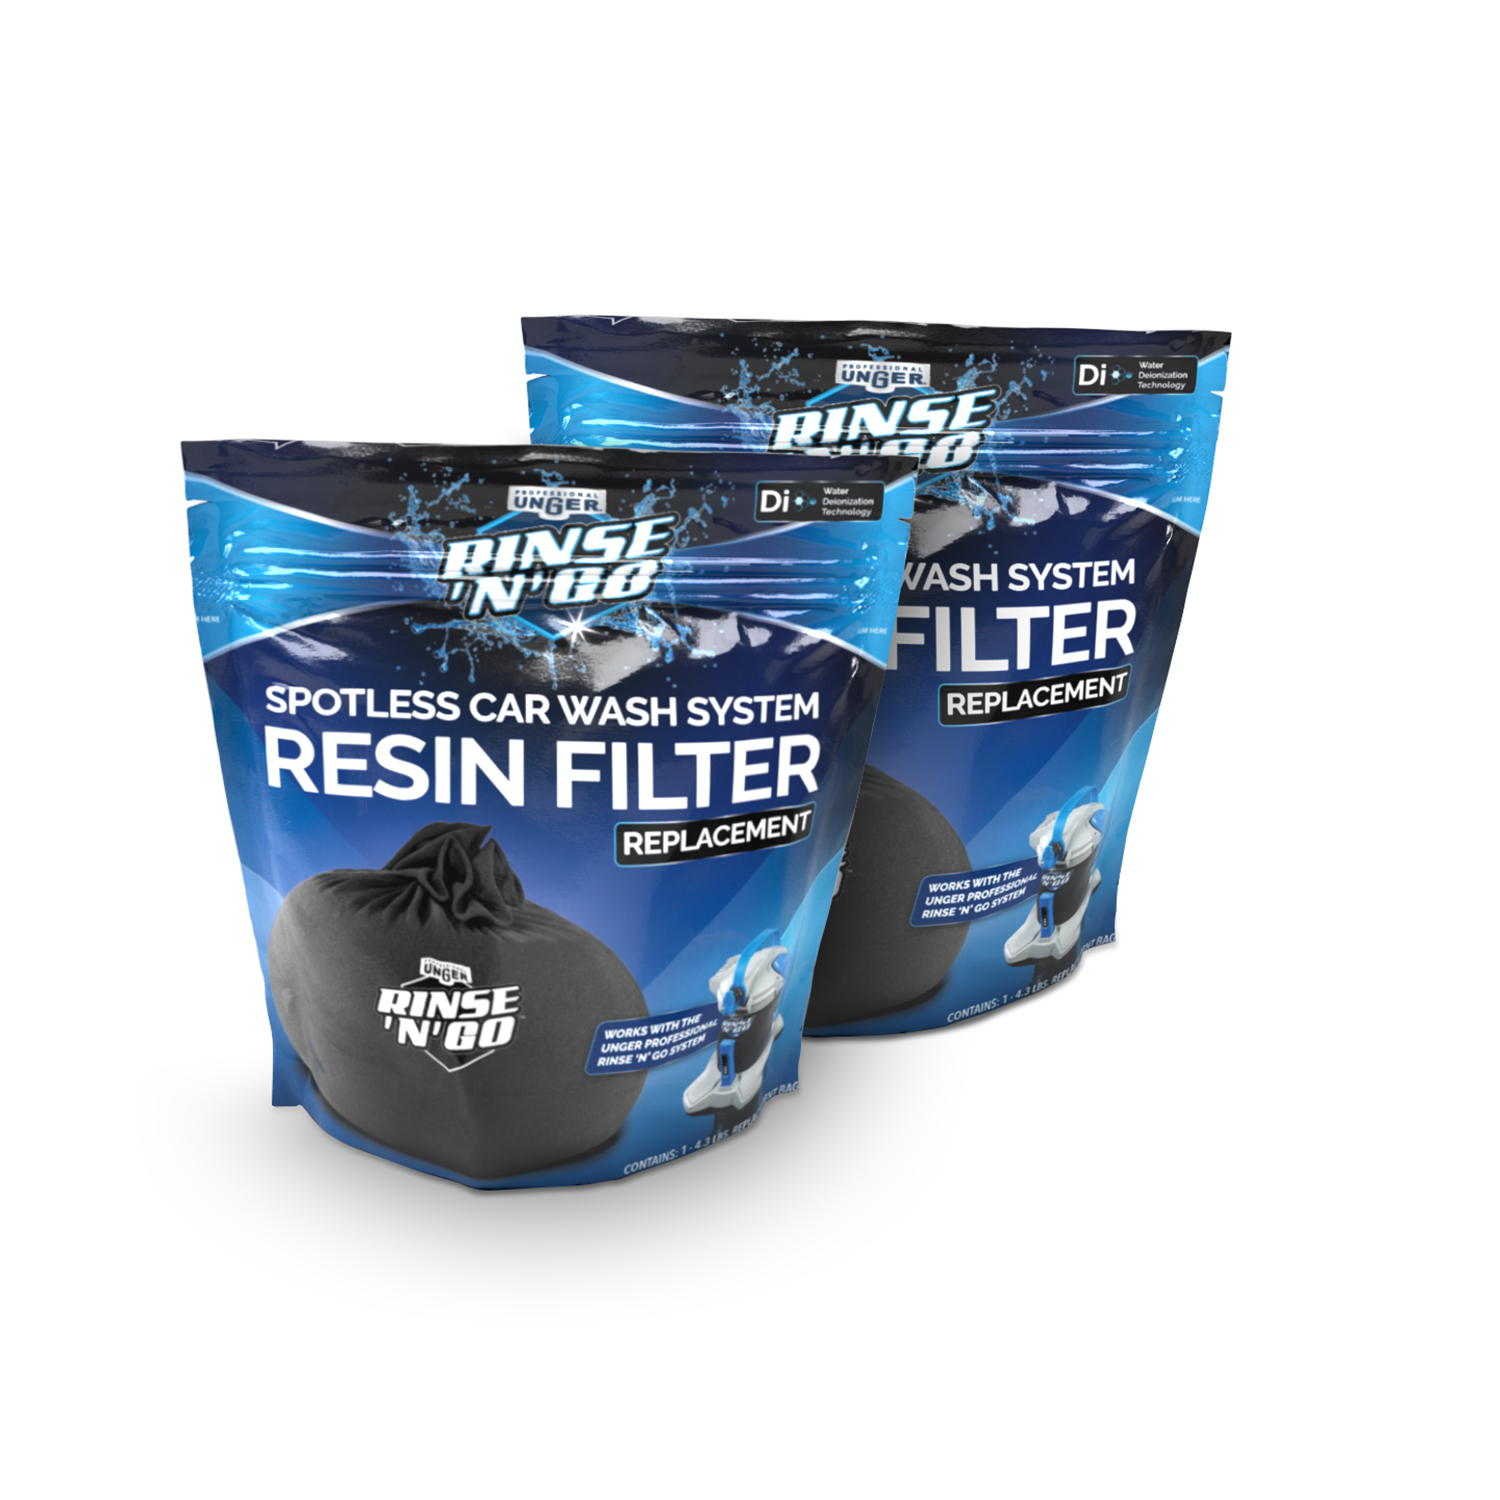 Rinse ‘N’ Go Replacement Resin Filters